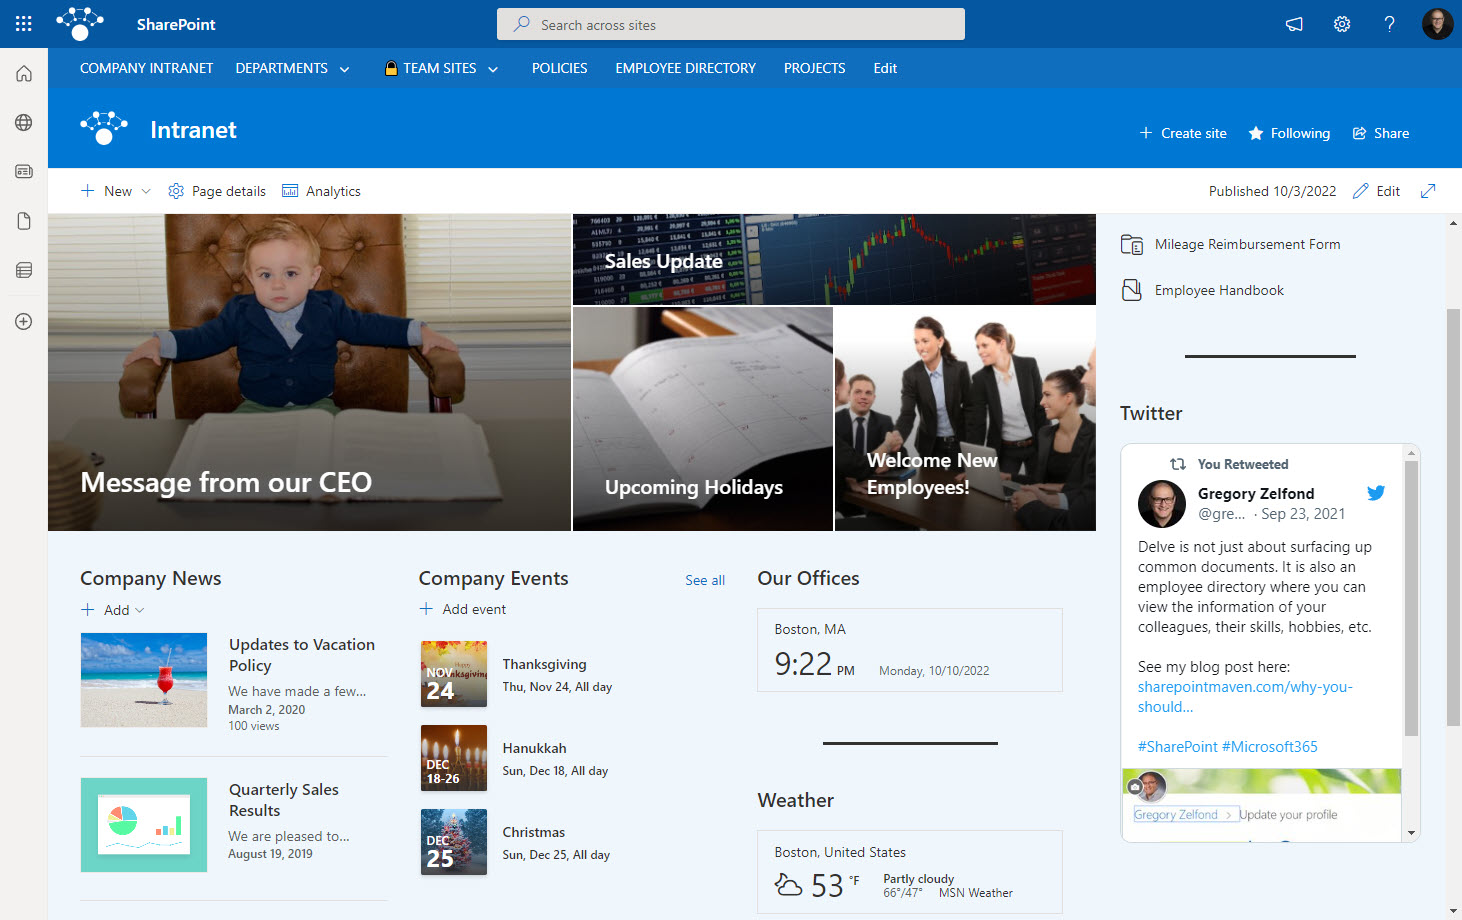 SharePoint Intranet Examples available out of the box